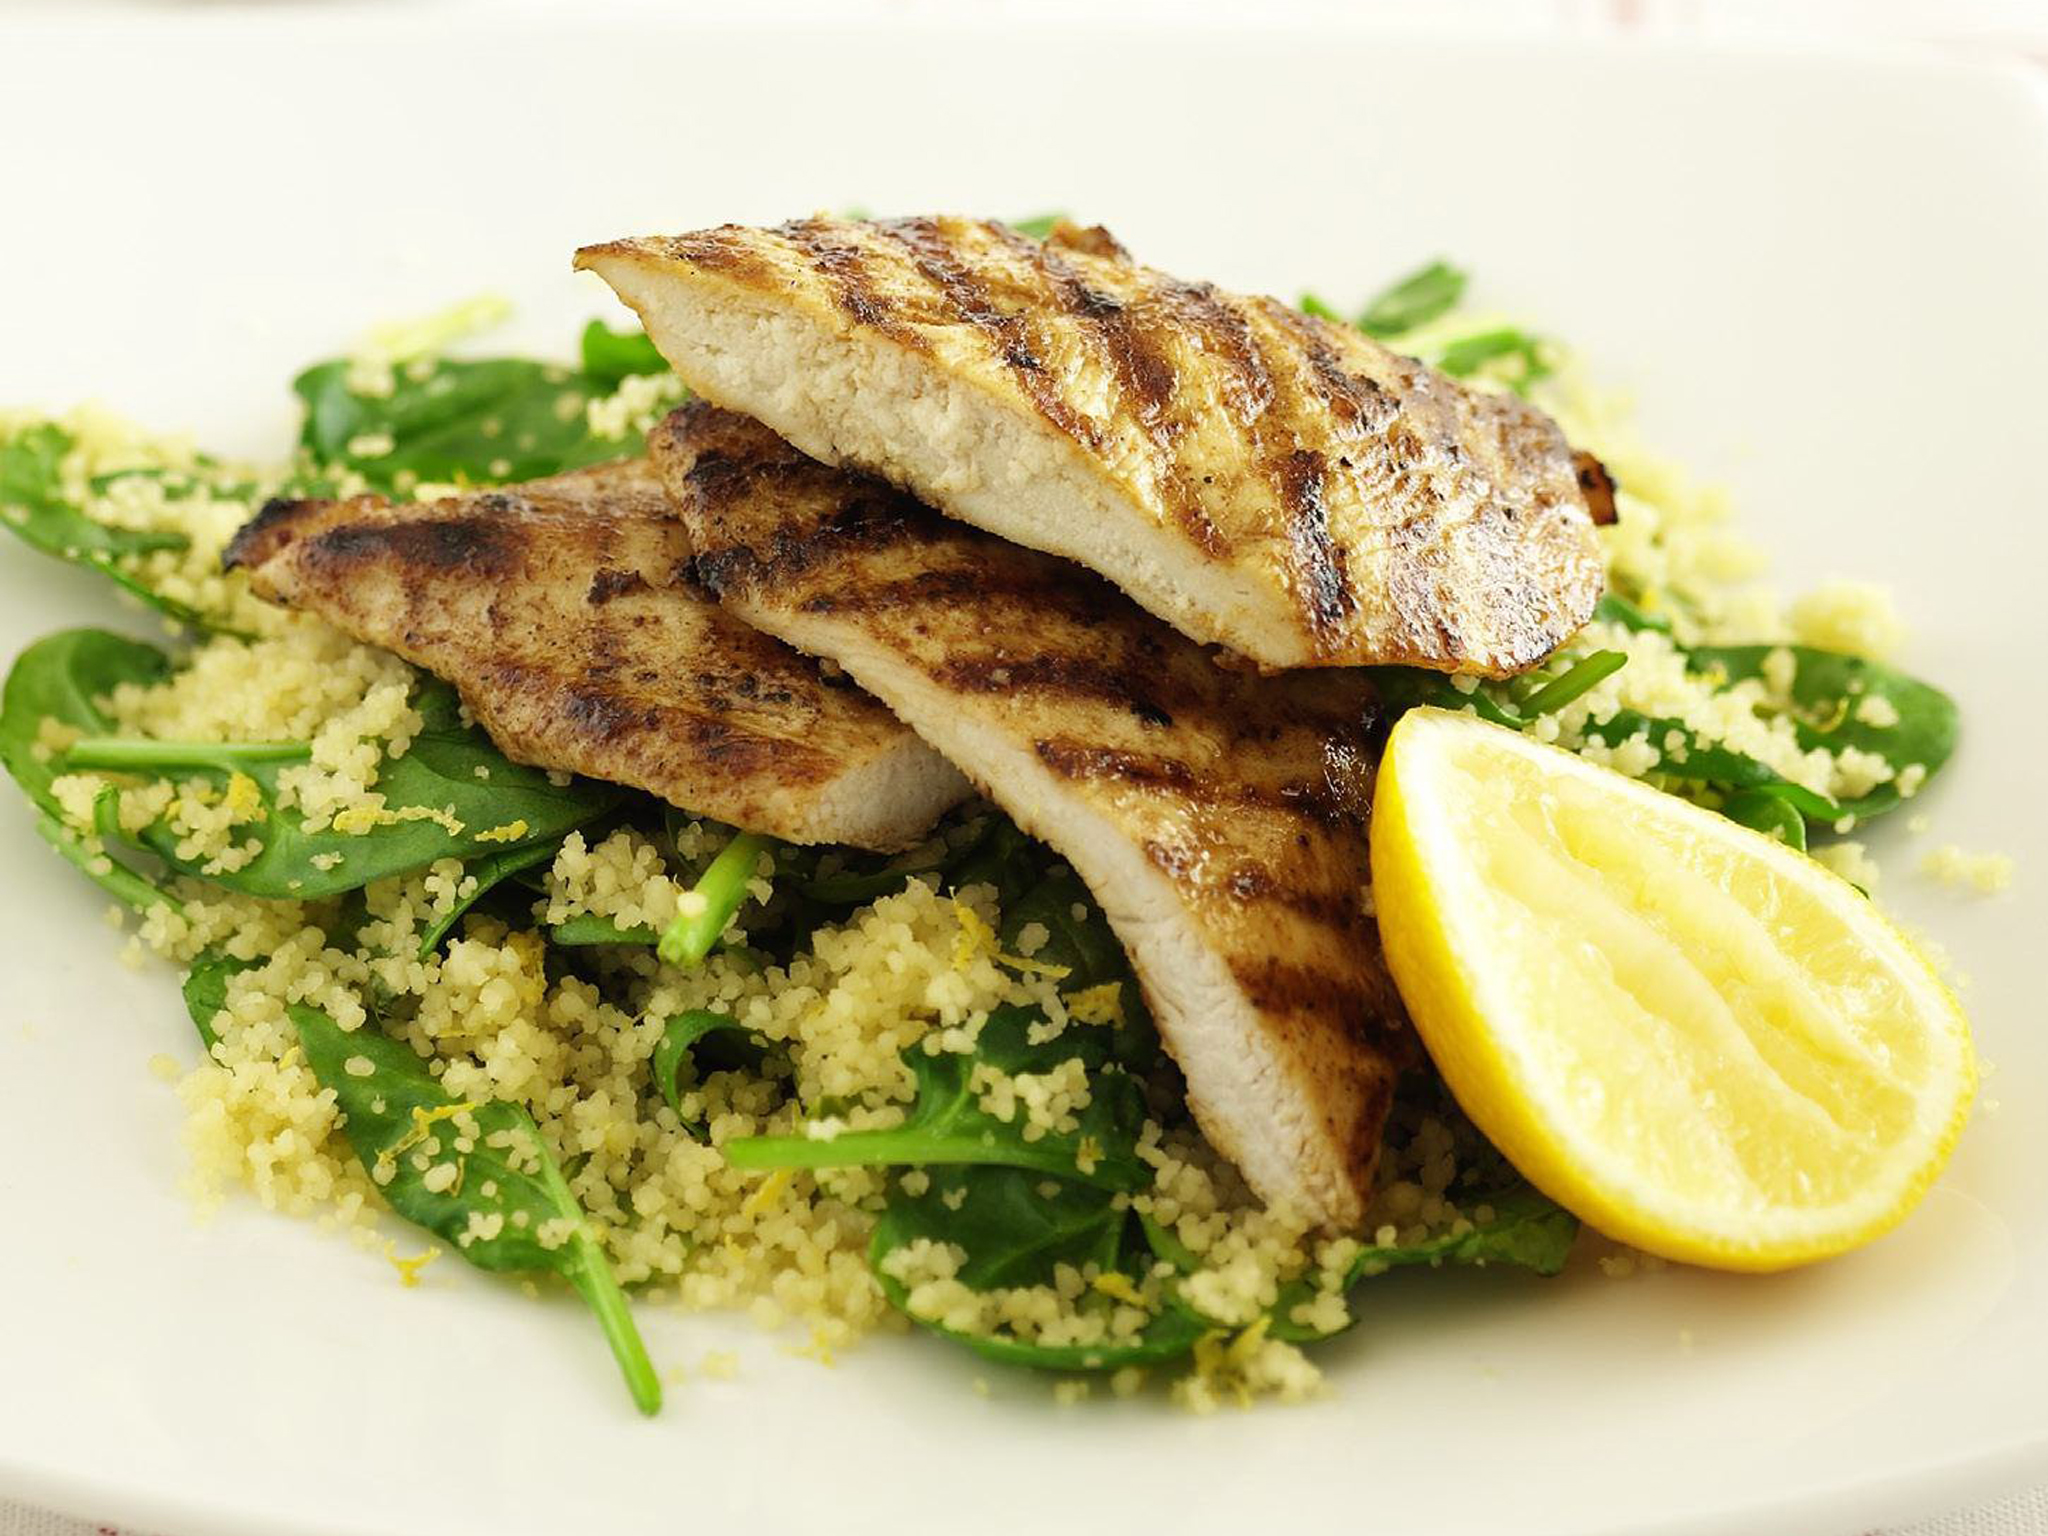 Spicy chicken on couscous with spinach